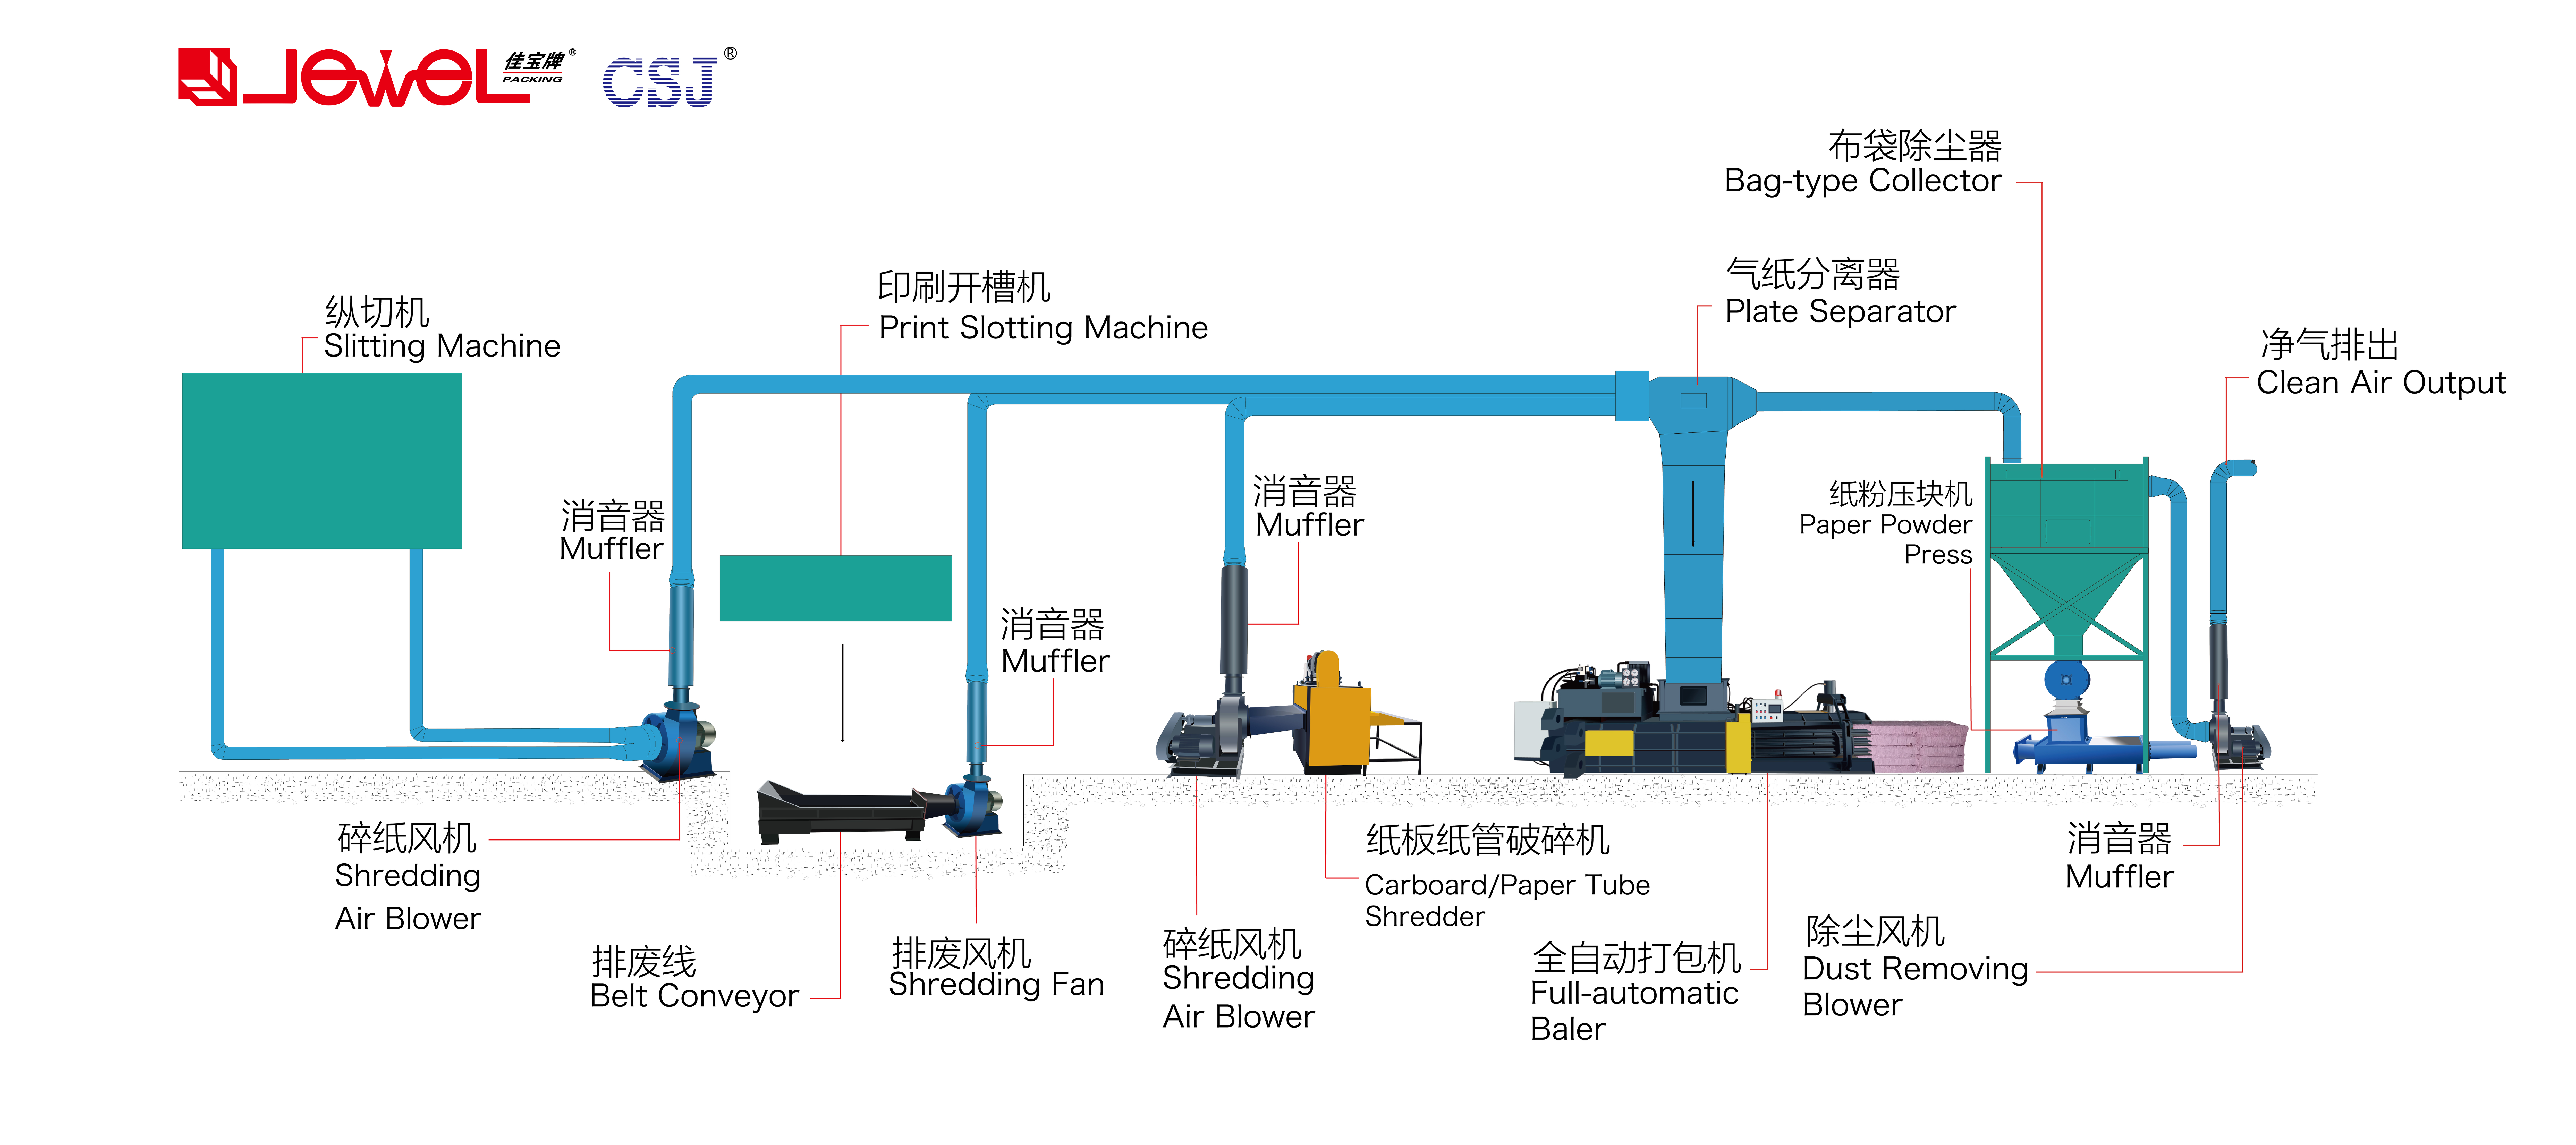 Choosing Jiabao Makes Whole Production Line More Efficient!